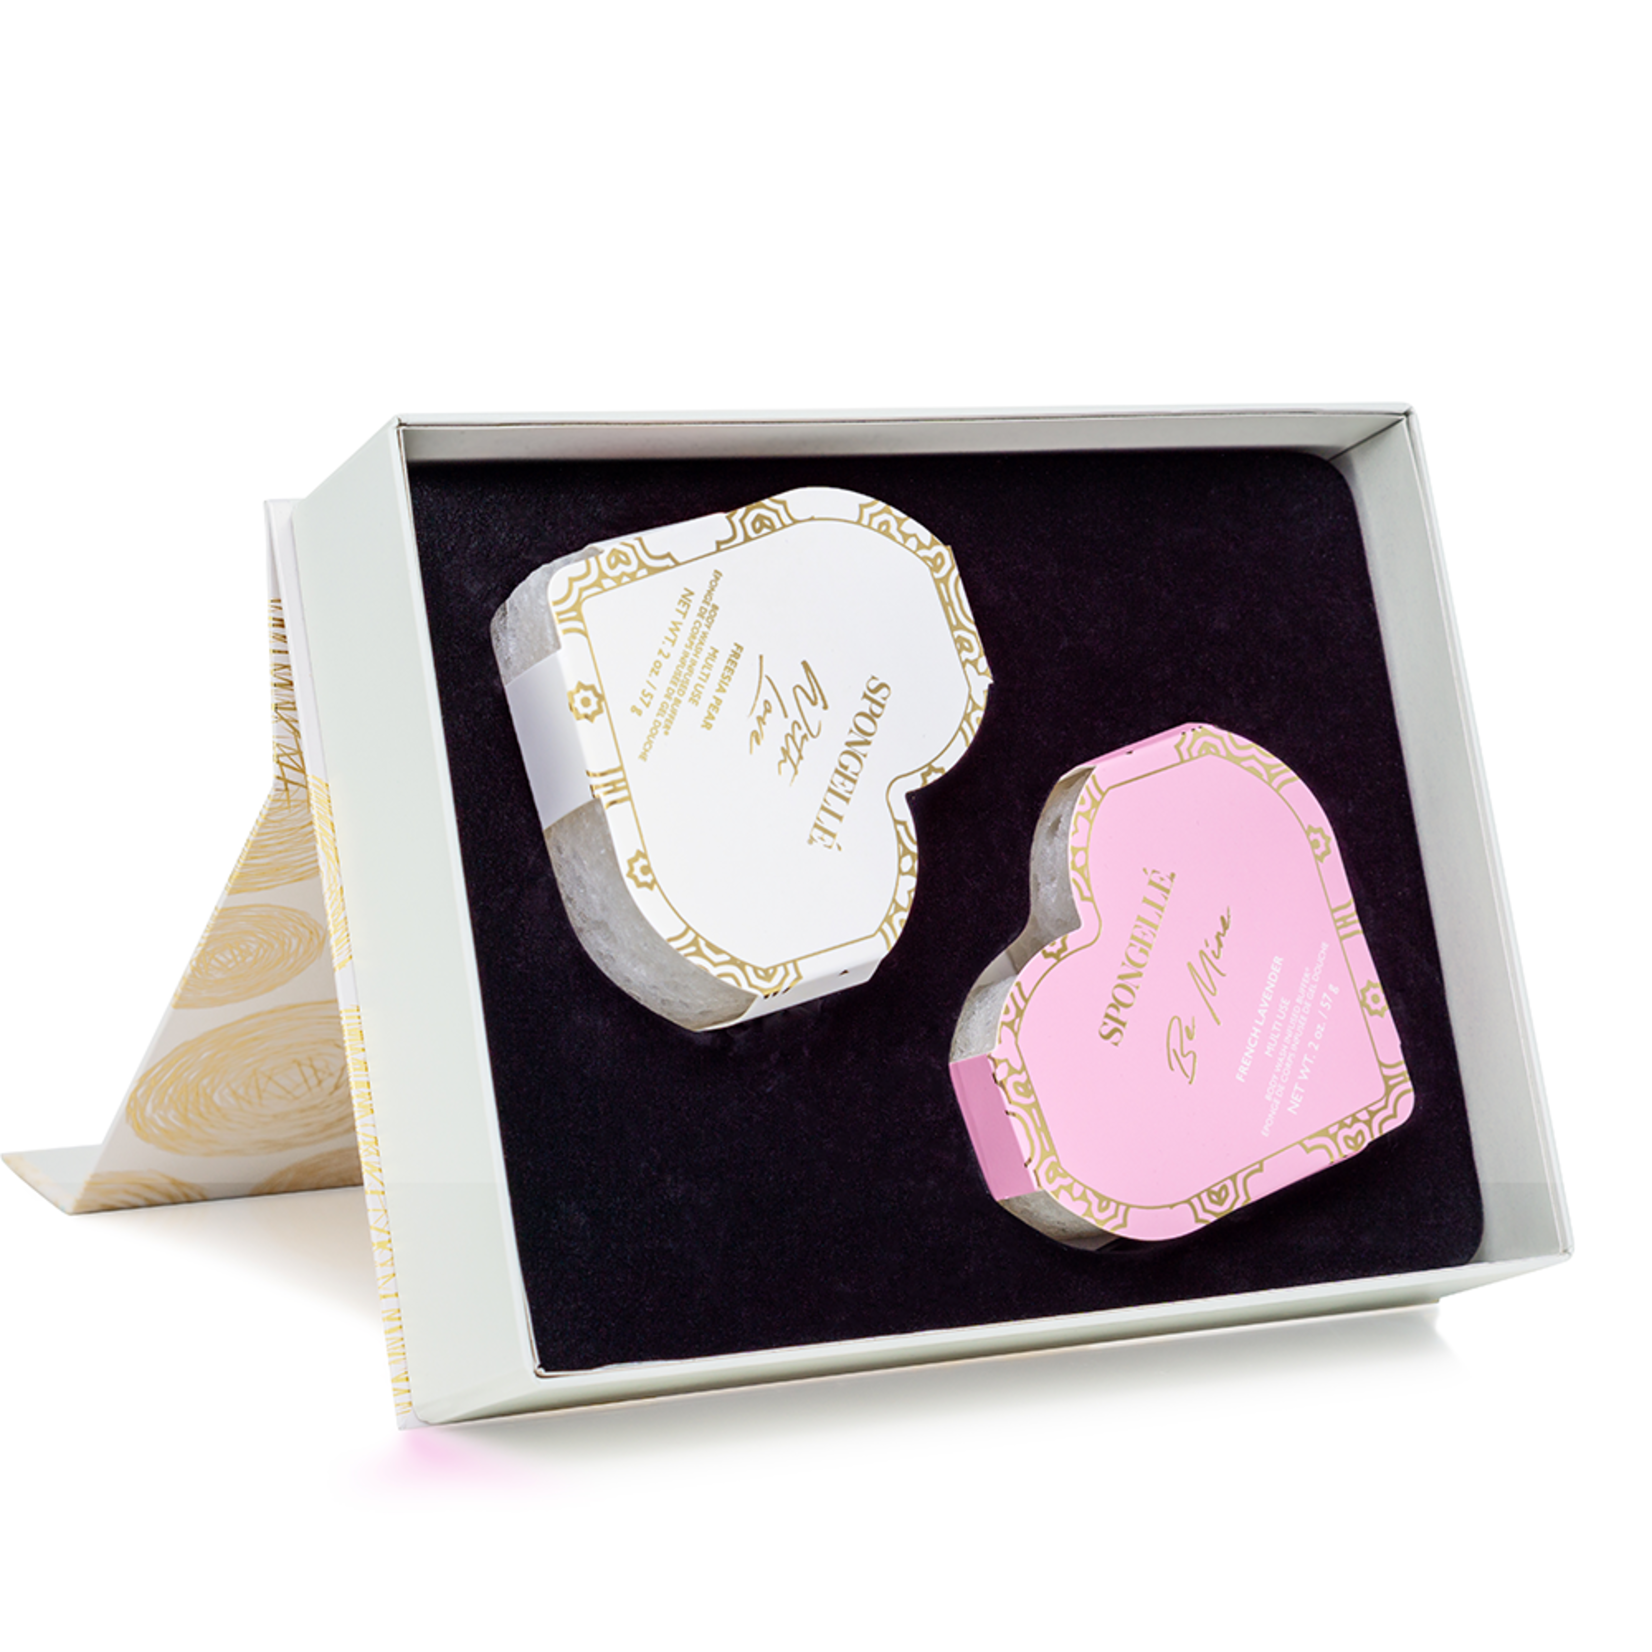 Spongelle Gift Set WITH LOVE (French Lavender / Freesia Pear)